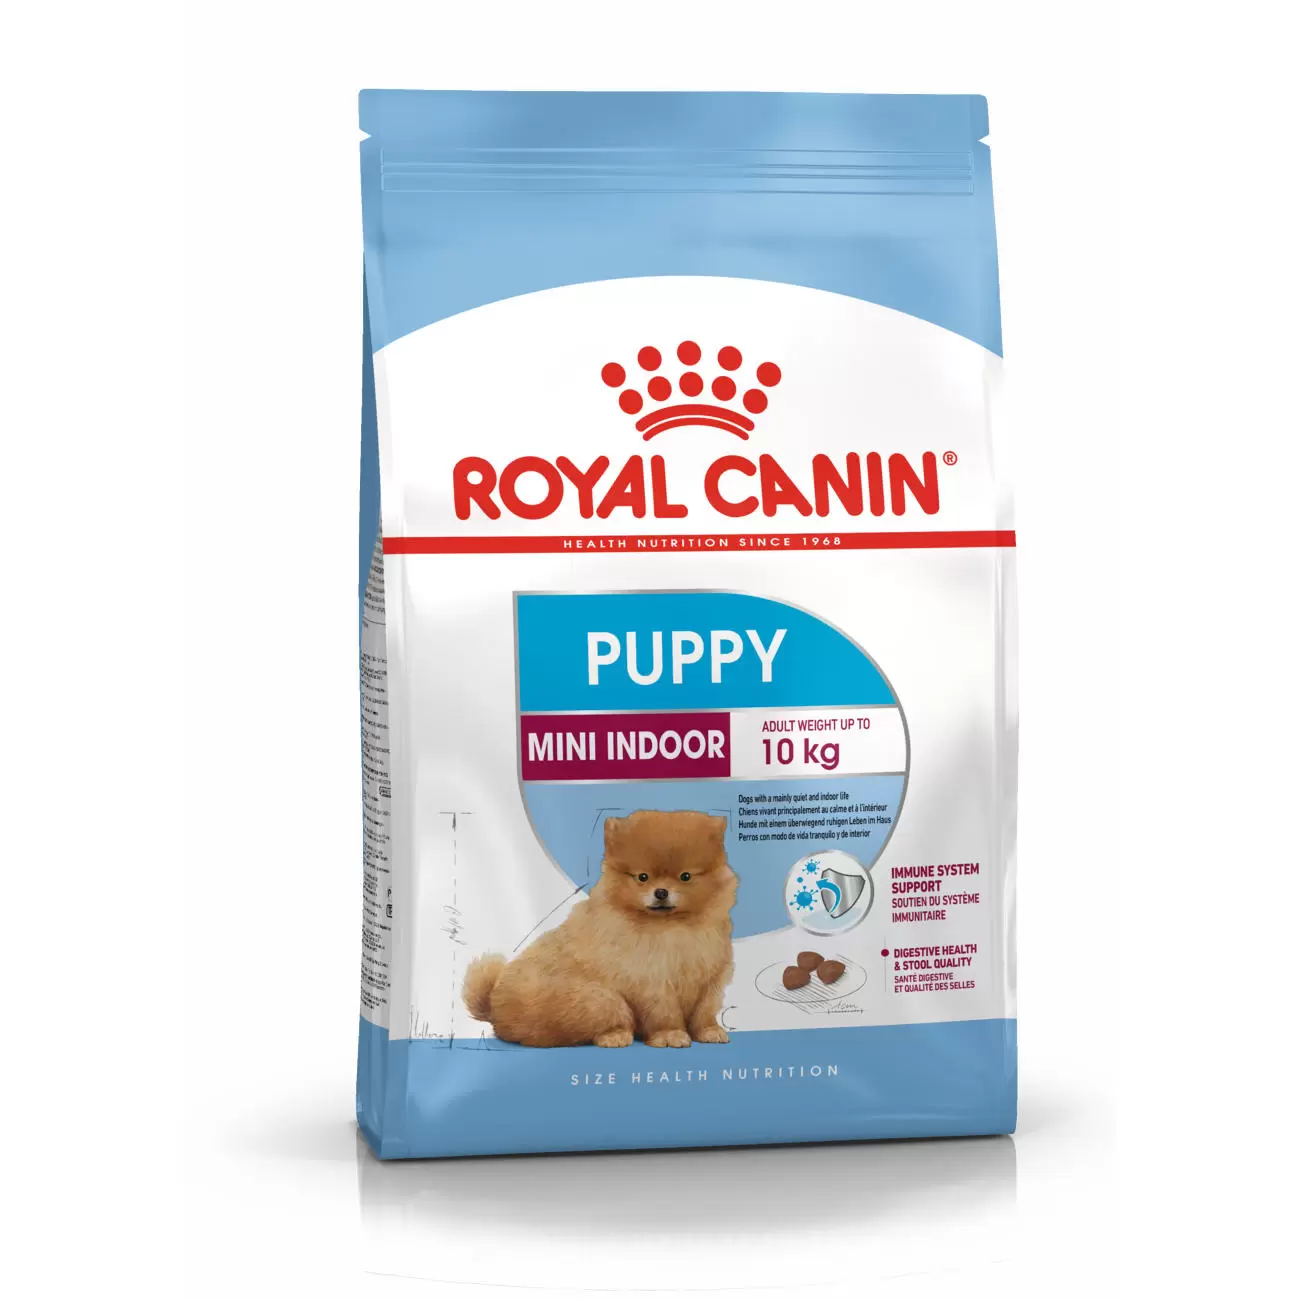 ROYAL CANIN MINI INDOOR PUPPY X 1.5KG